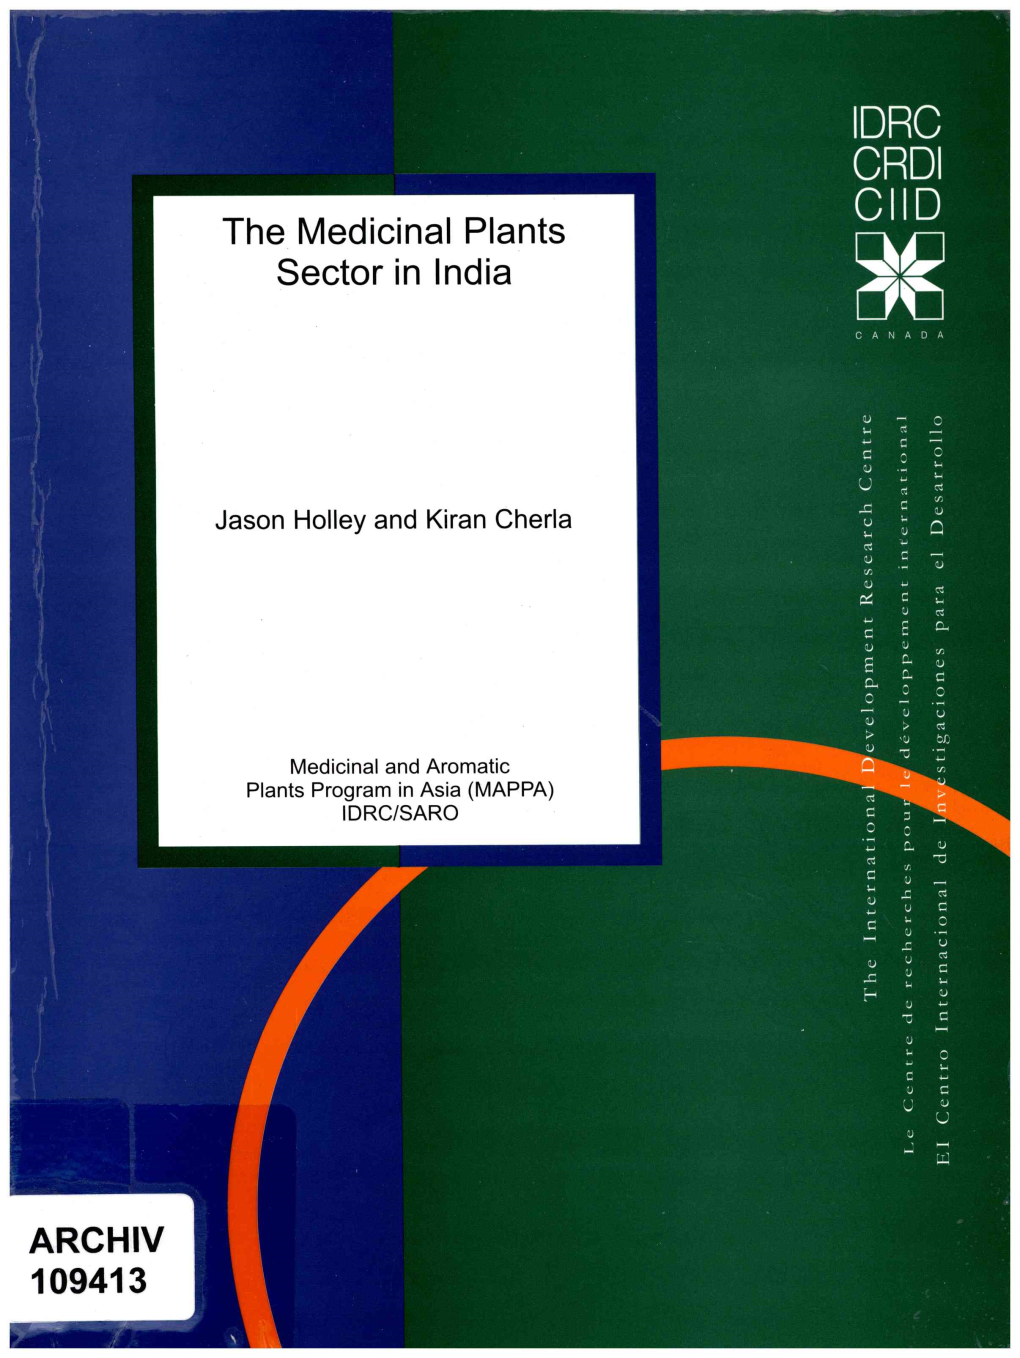 The Medicinal Plants Sector in India: a Review